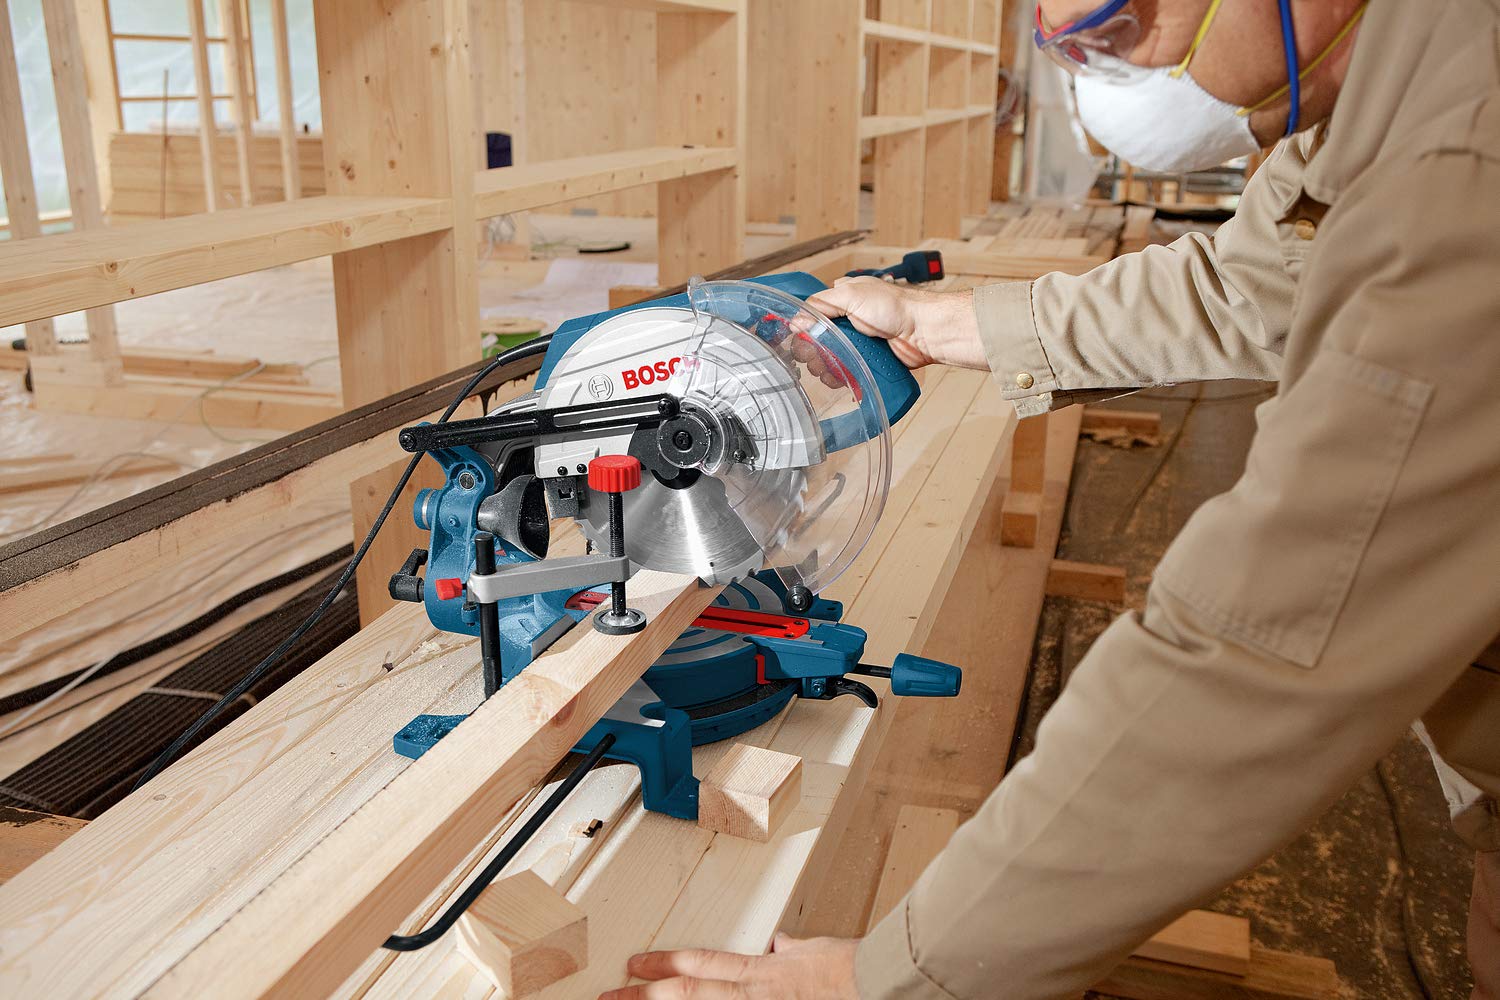 Unlock precision and versatility with the Bosch Mitre Saw 1700W (GCM 10 MX) at SupplyMaster.store in Ghana. Bench & Stationary Tool Buy Tools hardware Building materials